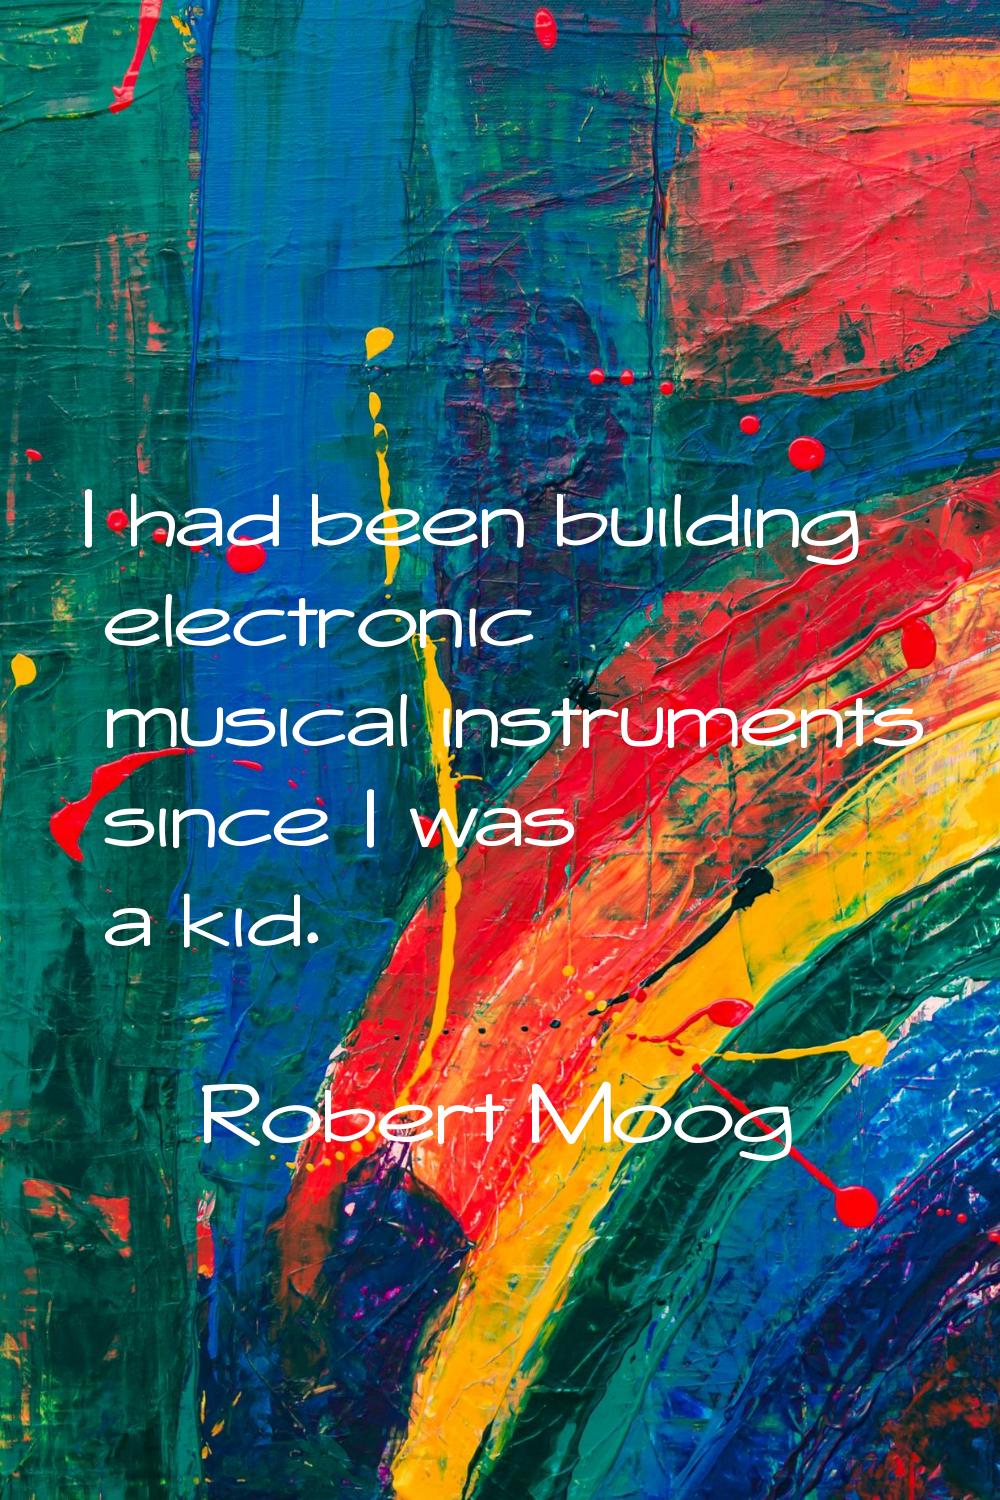 I had been building electronic musical instruments since I was a kid.